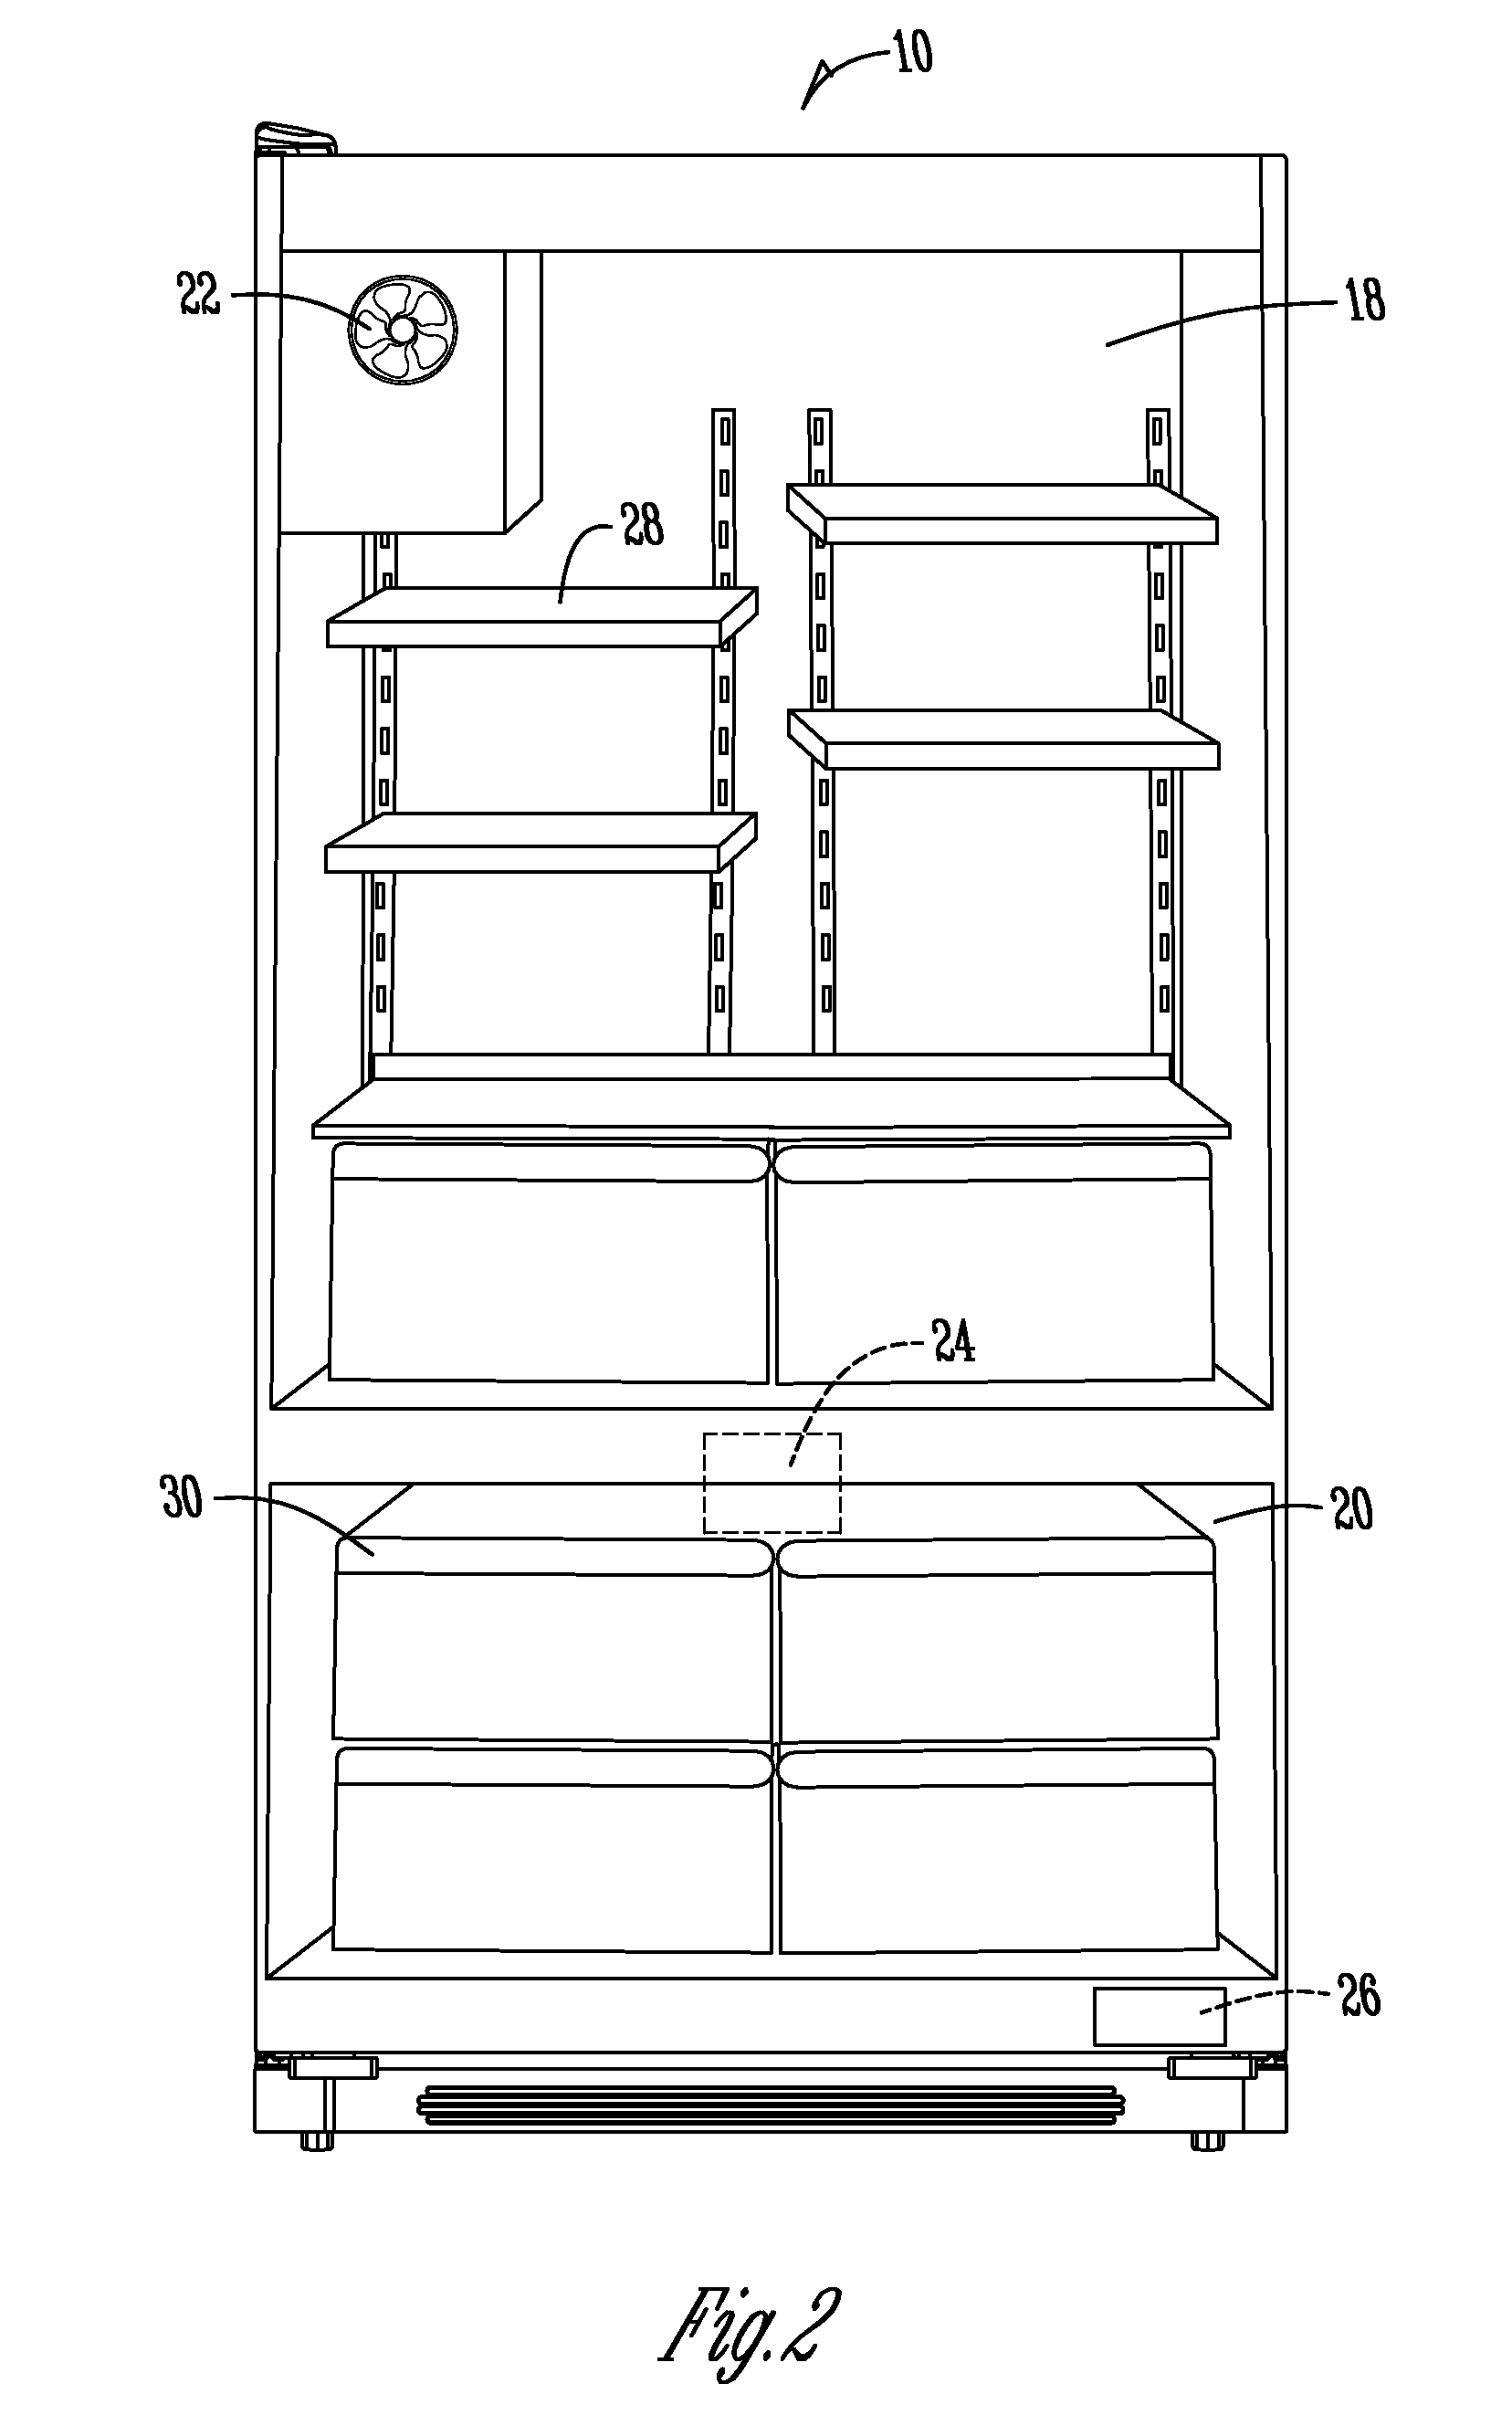 Extended cold (battery backup) refrigerator